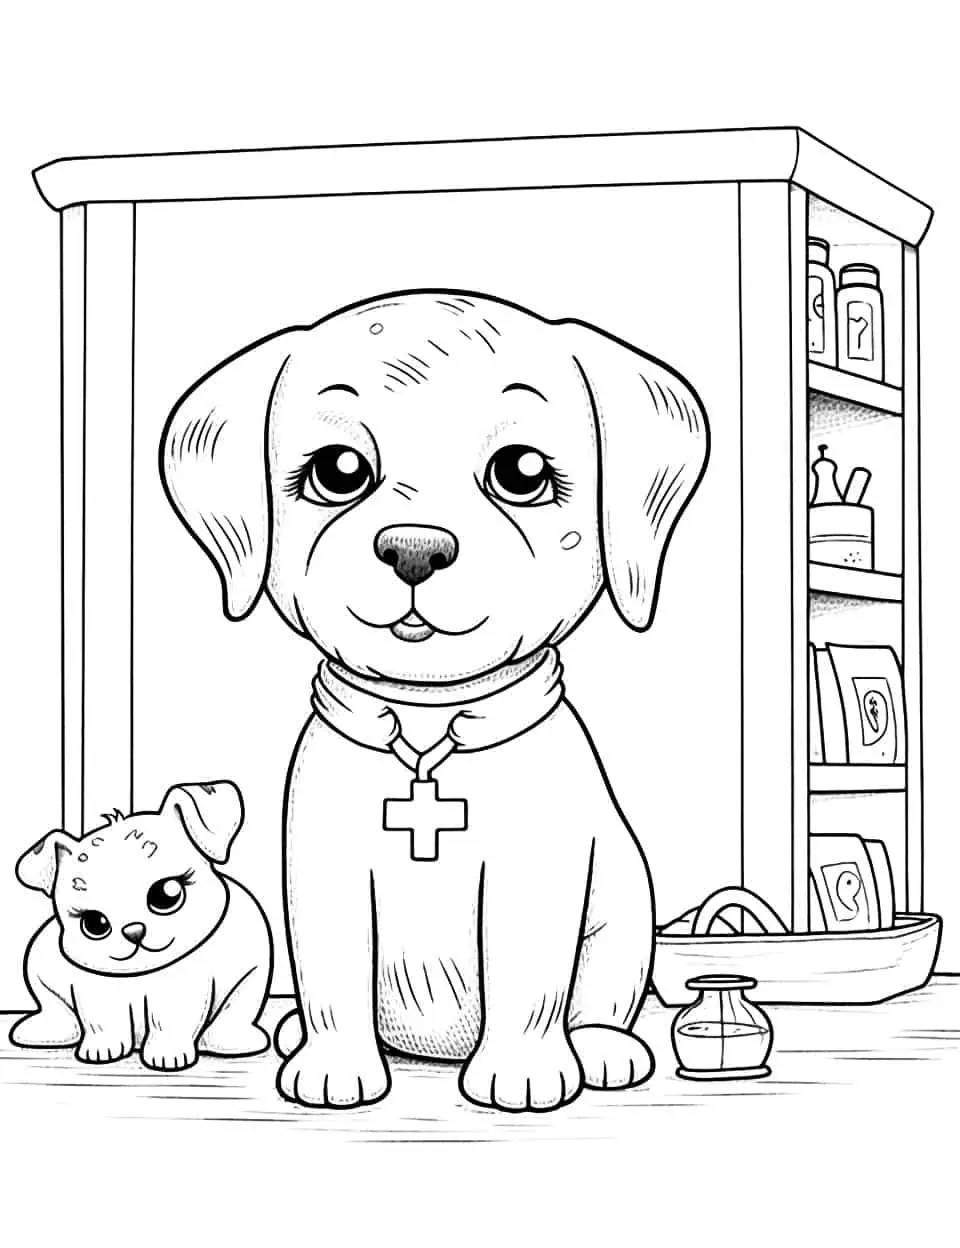 Pet Parlor Dog Coloring Page - A Poodle, a Yorkie, and a Siamese cat having a spa day at a pet parlor.